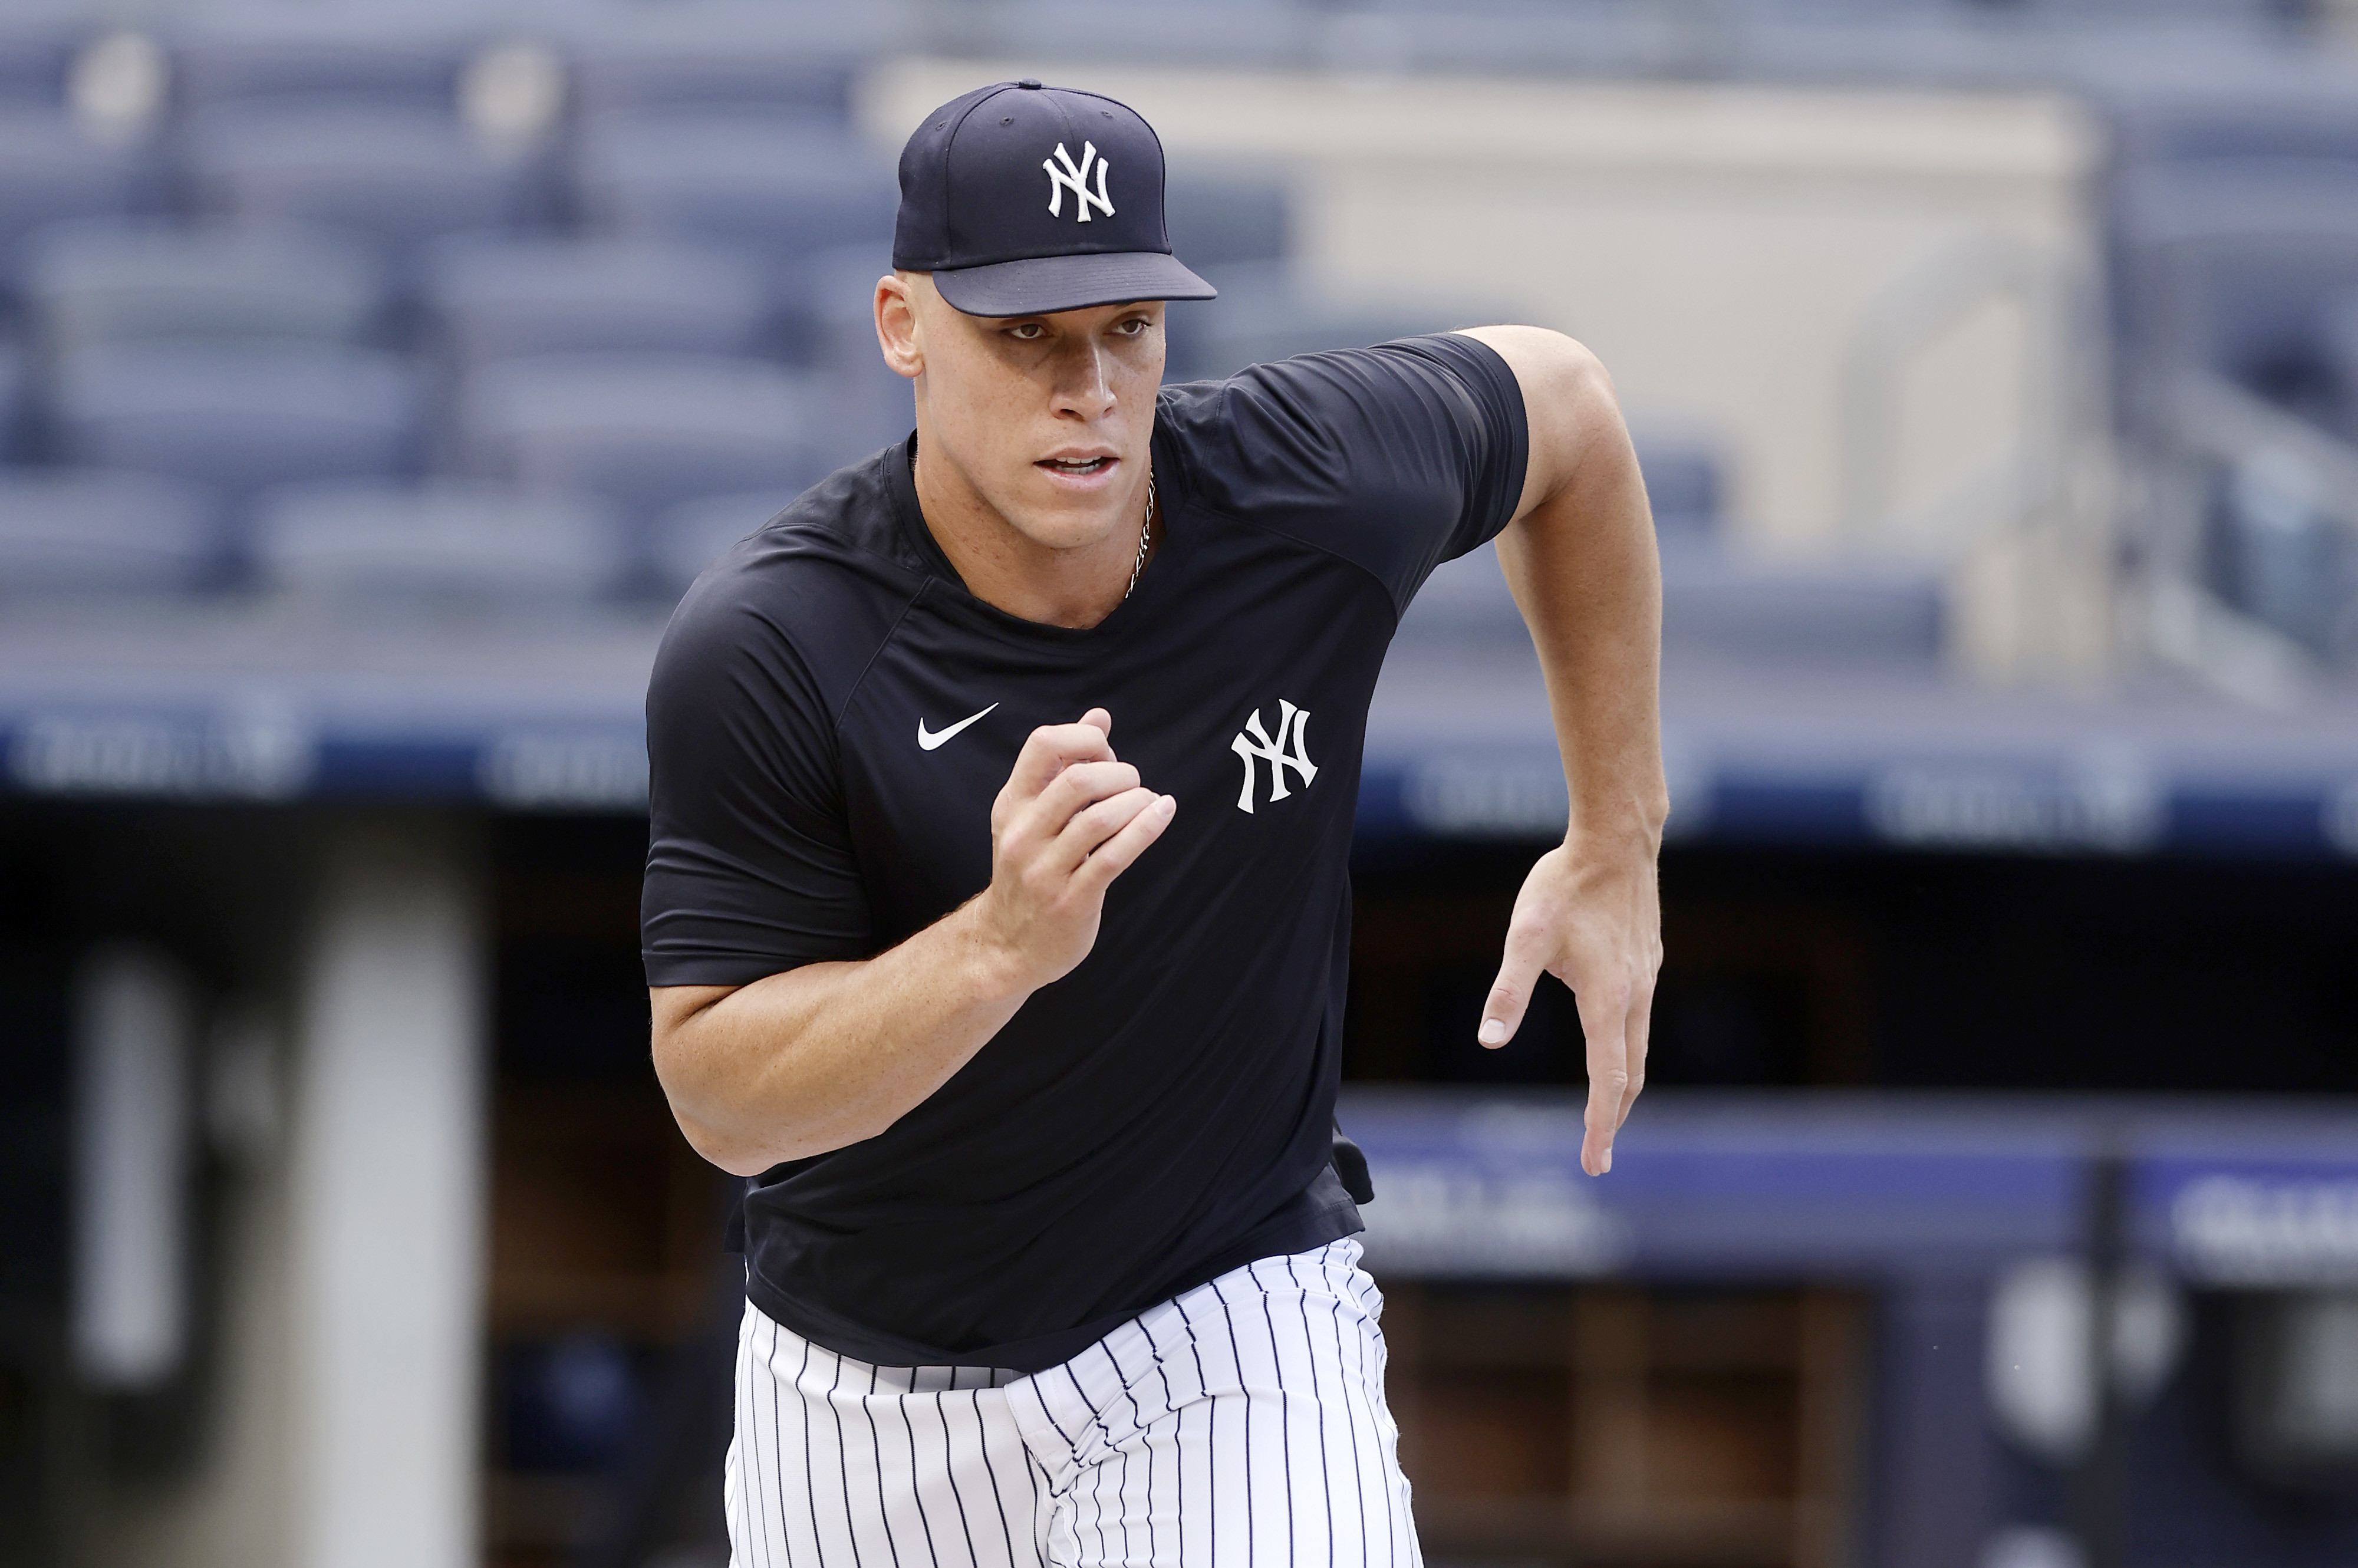 The Nike Air Jordan cleats of Aaron Judge of the New York Yankees are  News Photo - Getty Images